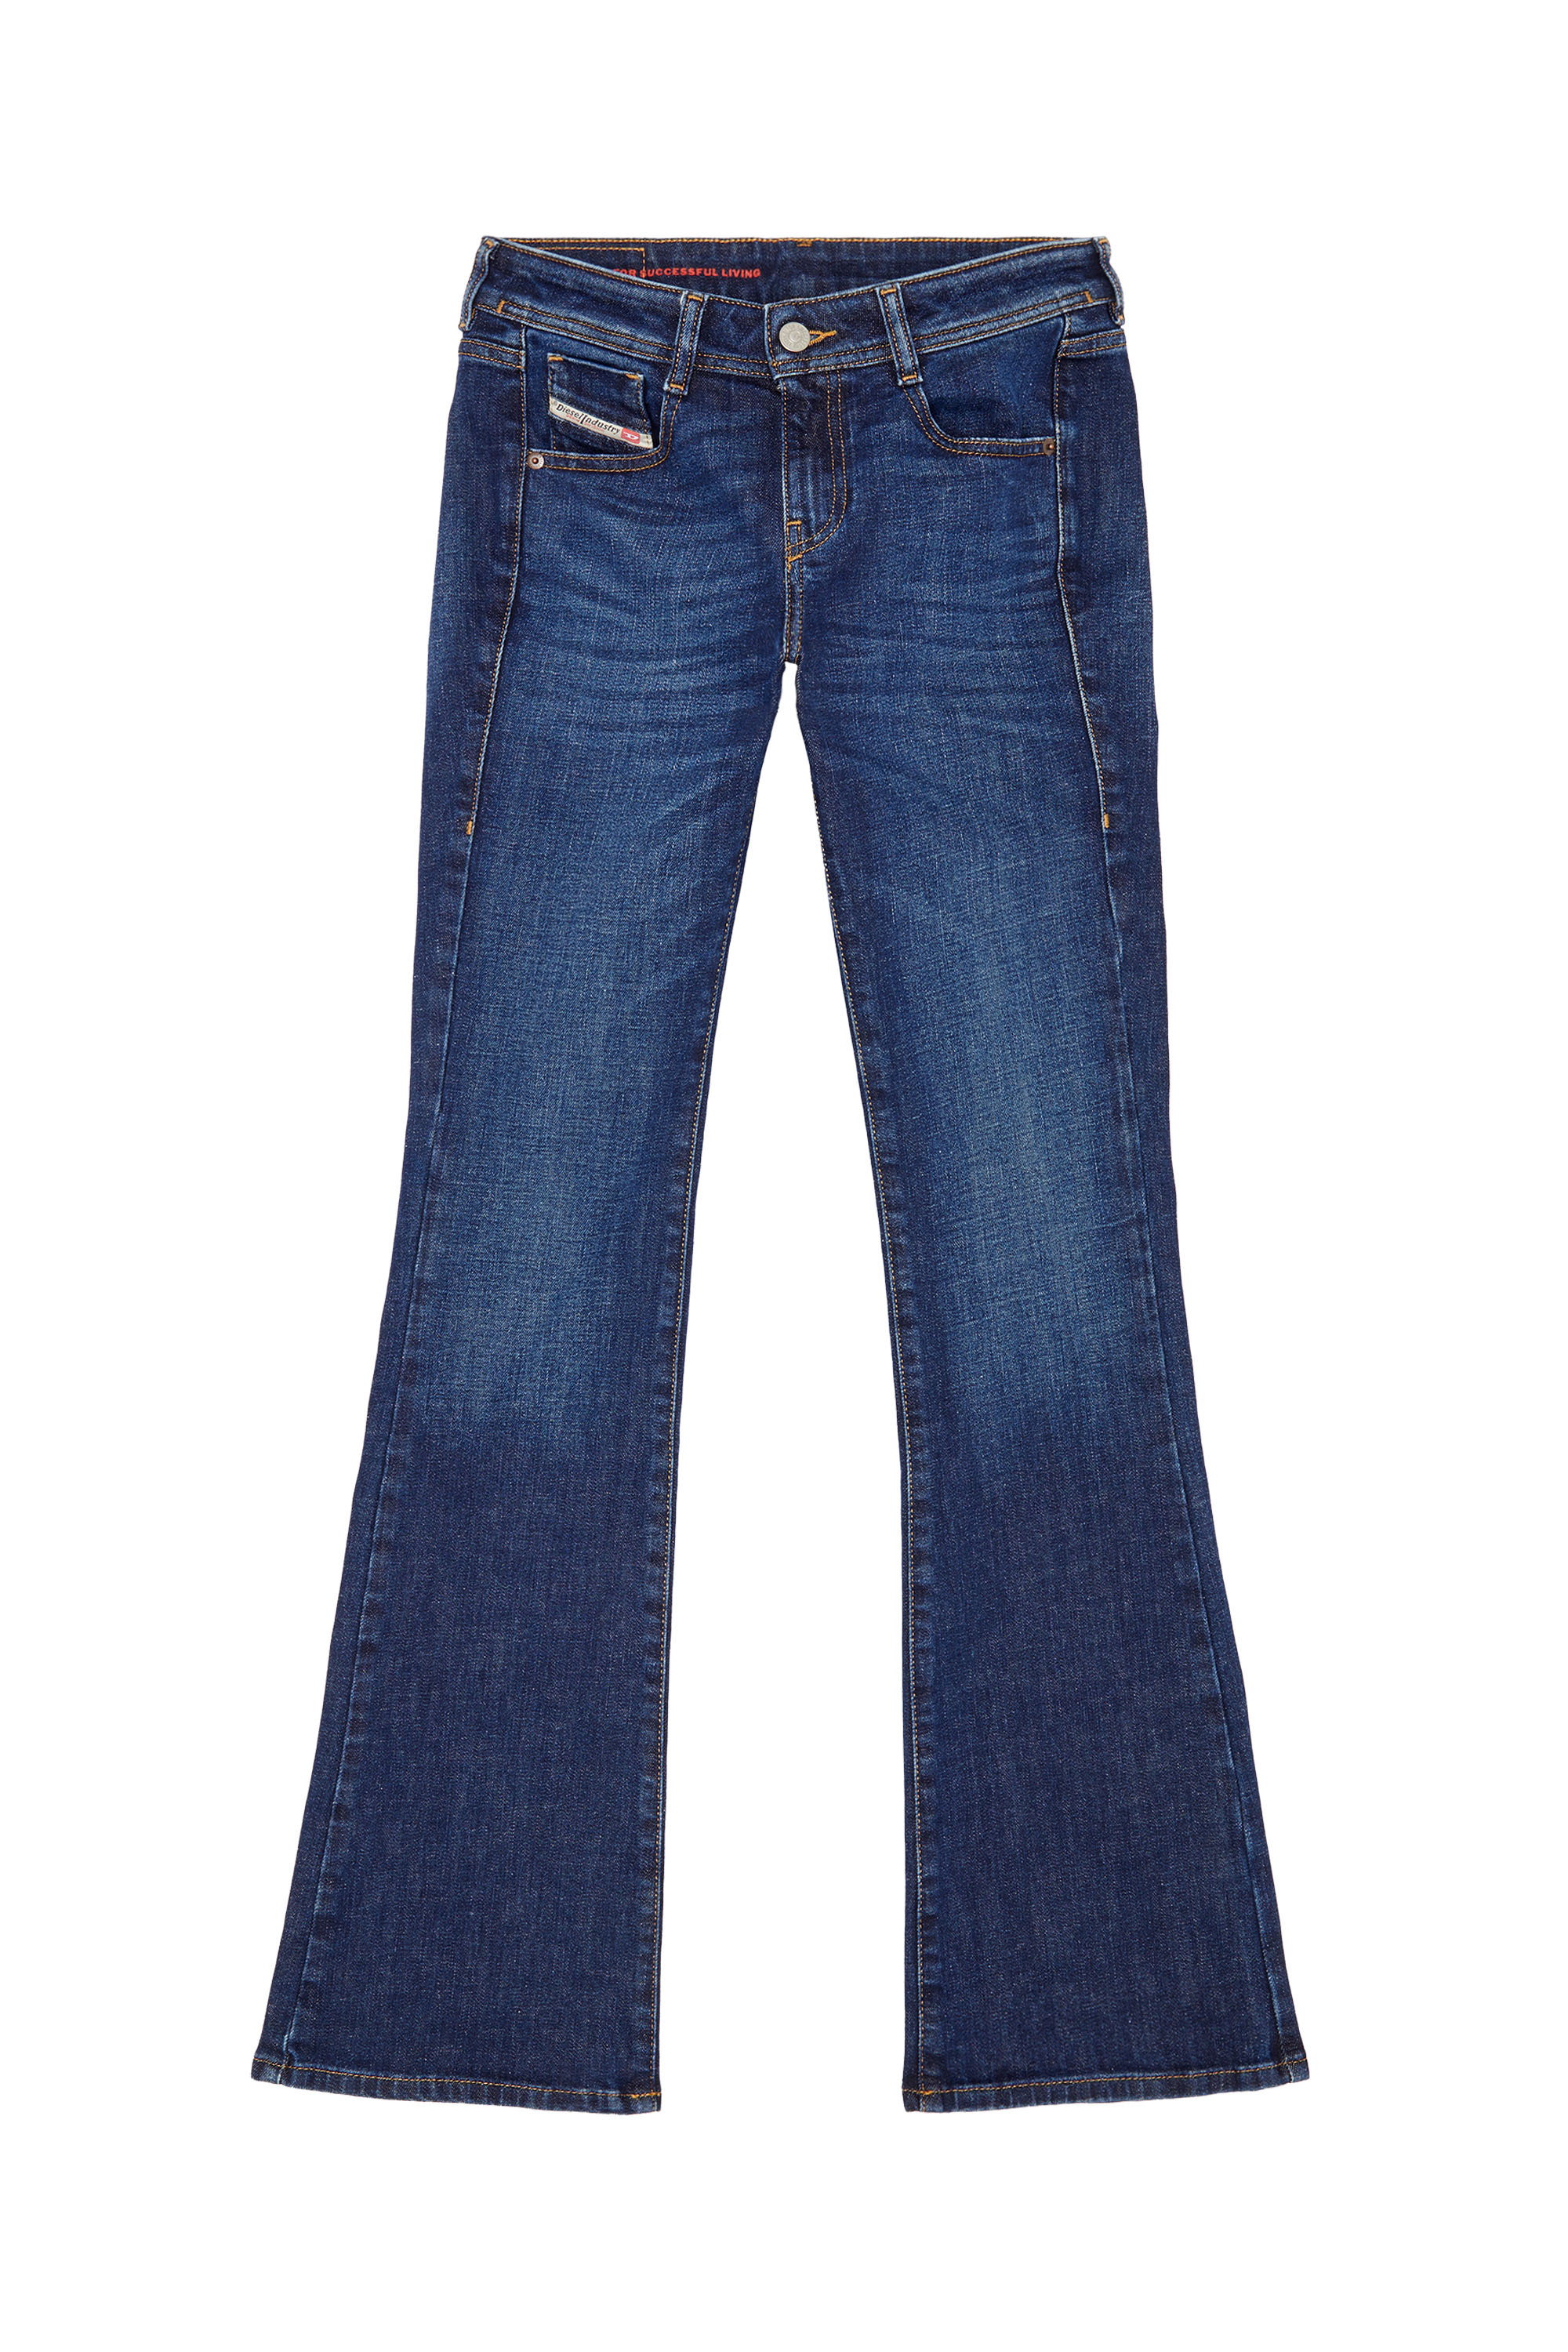 Bootcut and Flare Jeans 1969 D-Ebbey 09B90, Dunkelblau - Jeans